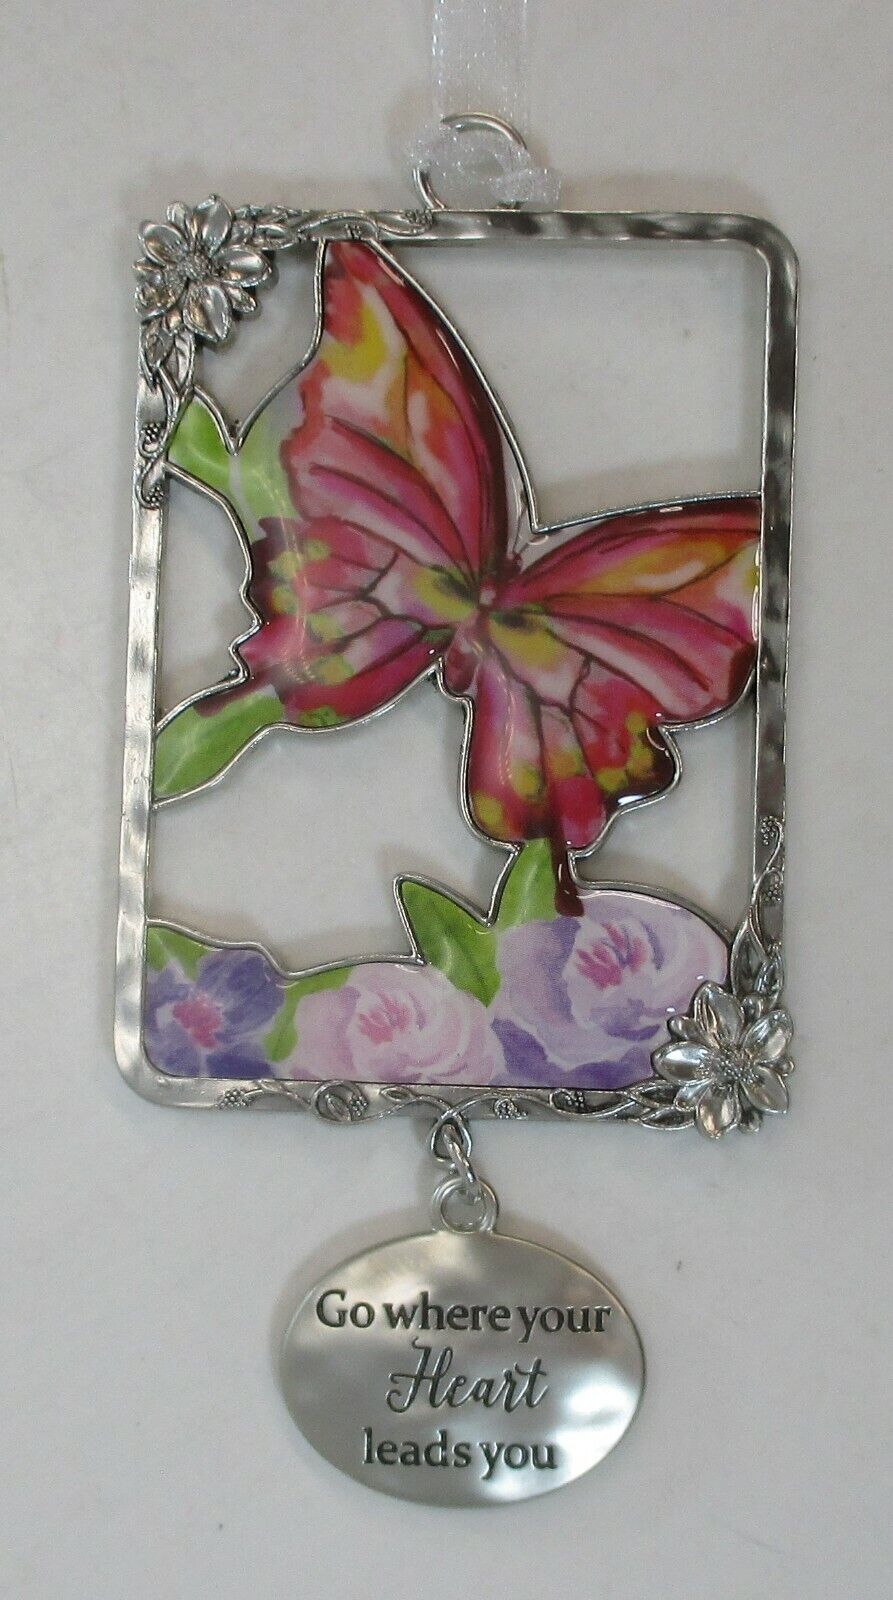 O4 Butterfly Go where your heart leads you GARDEN OF BLESSINGS ORNAMENT GANZ